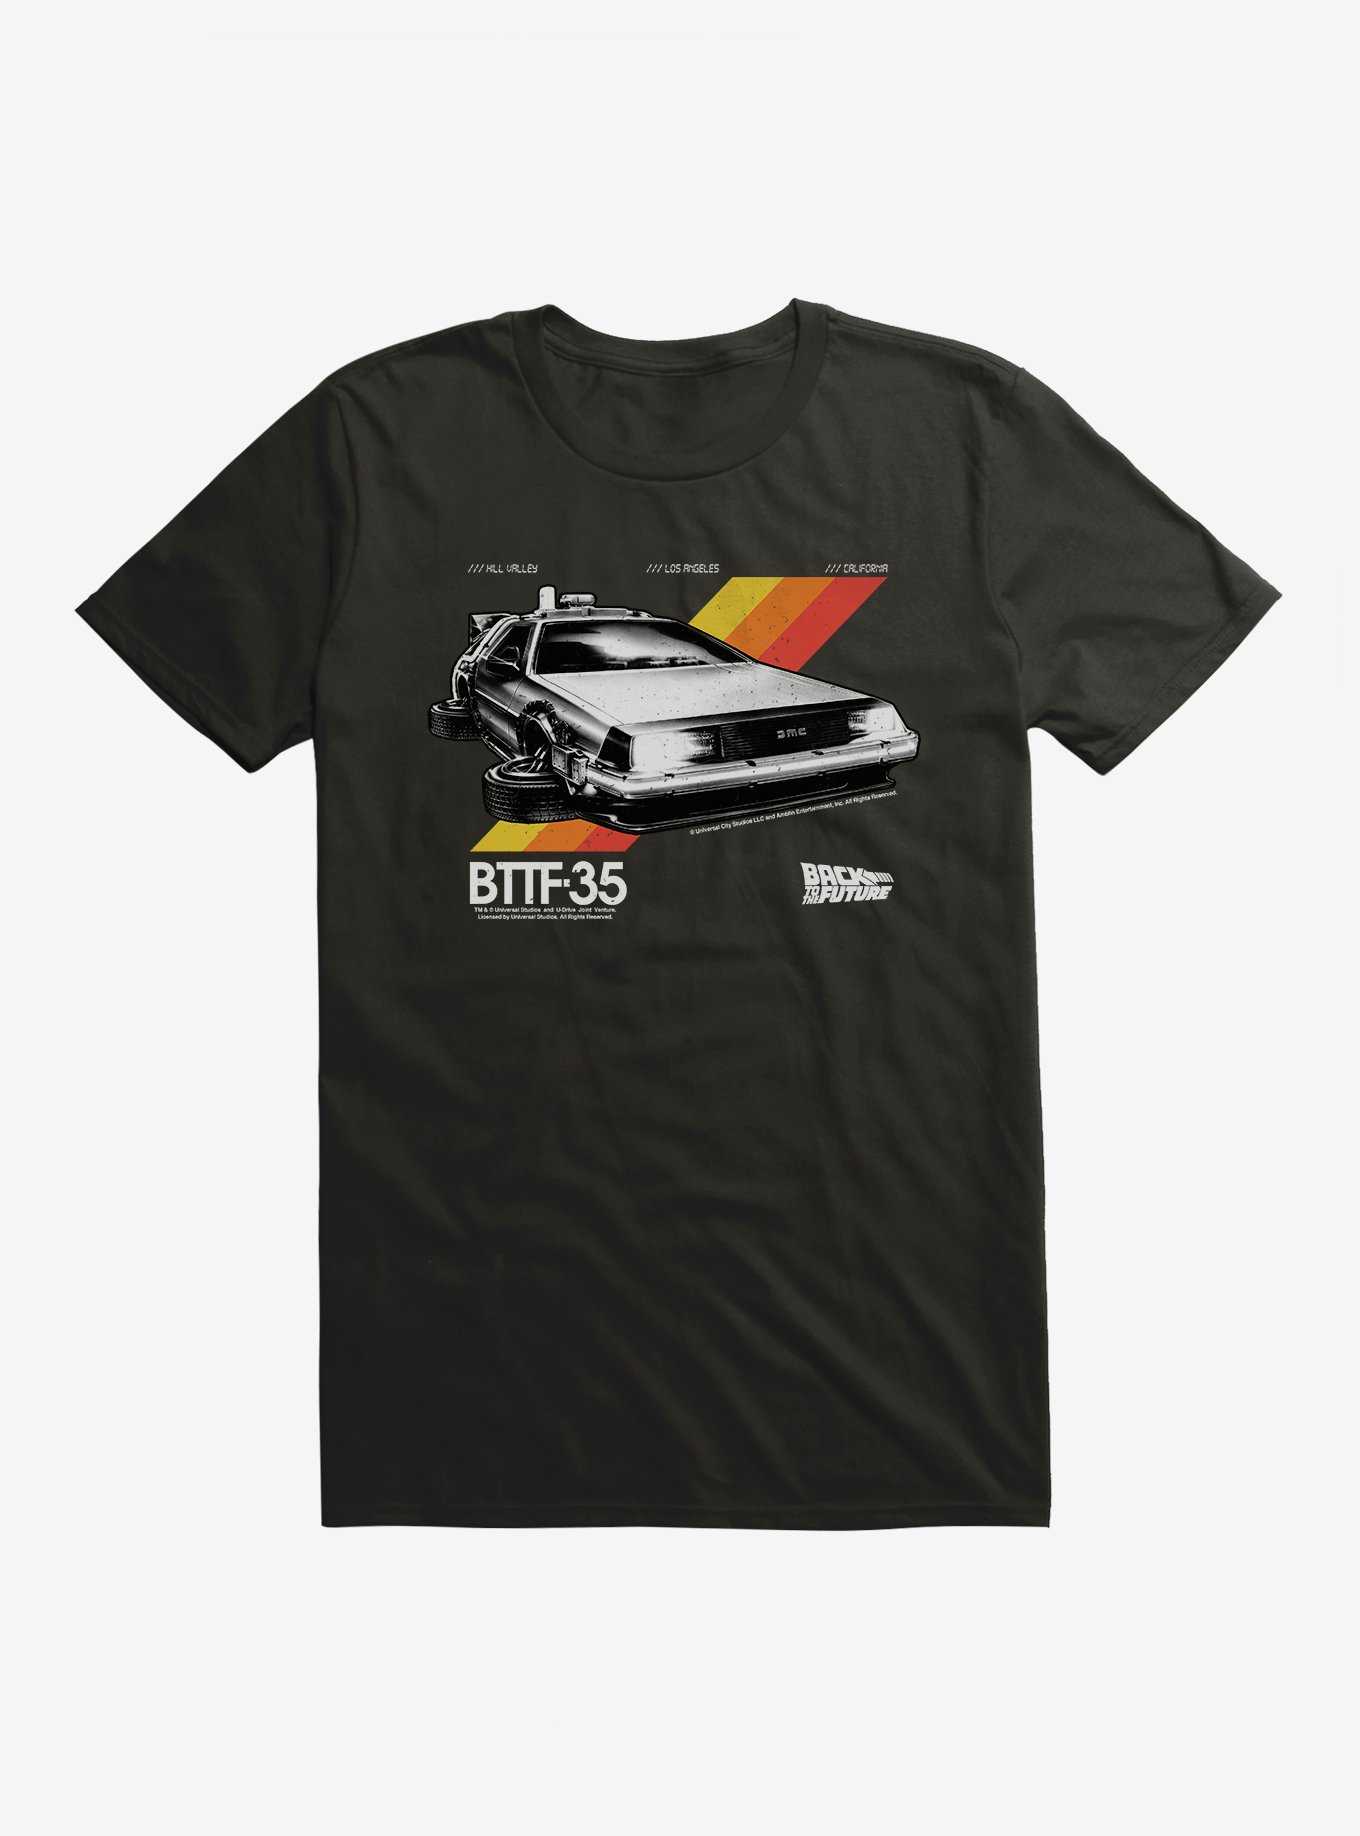 Back To The Future DeLorean Ready For Flight T-Shirt, , hi-res